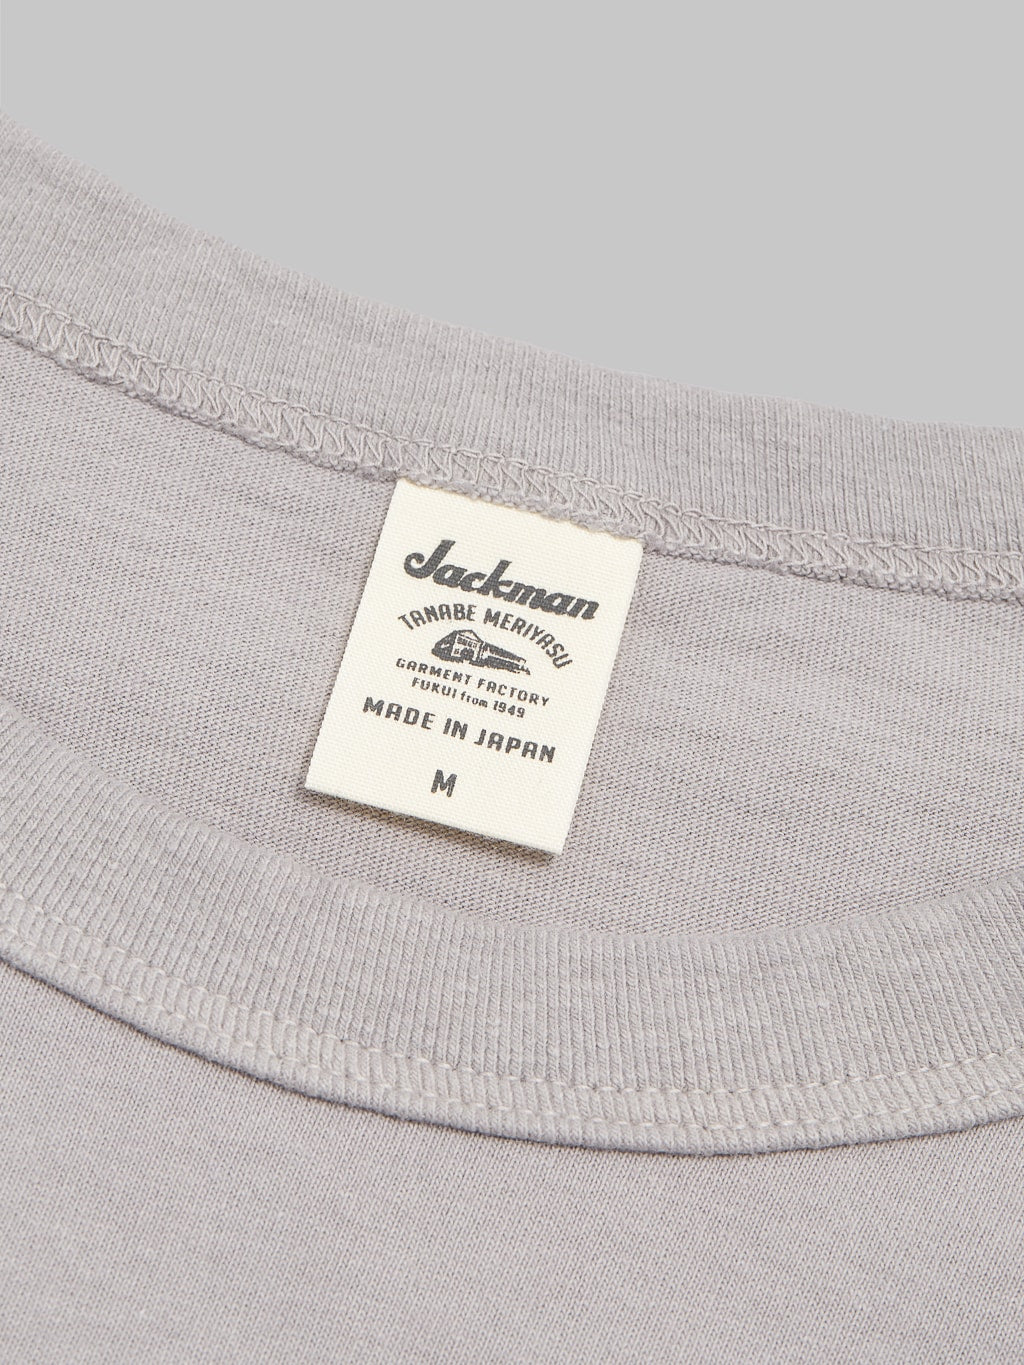 Jackman Lead Off TShirt grey midweight size label